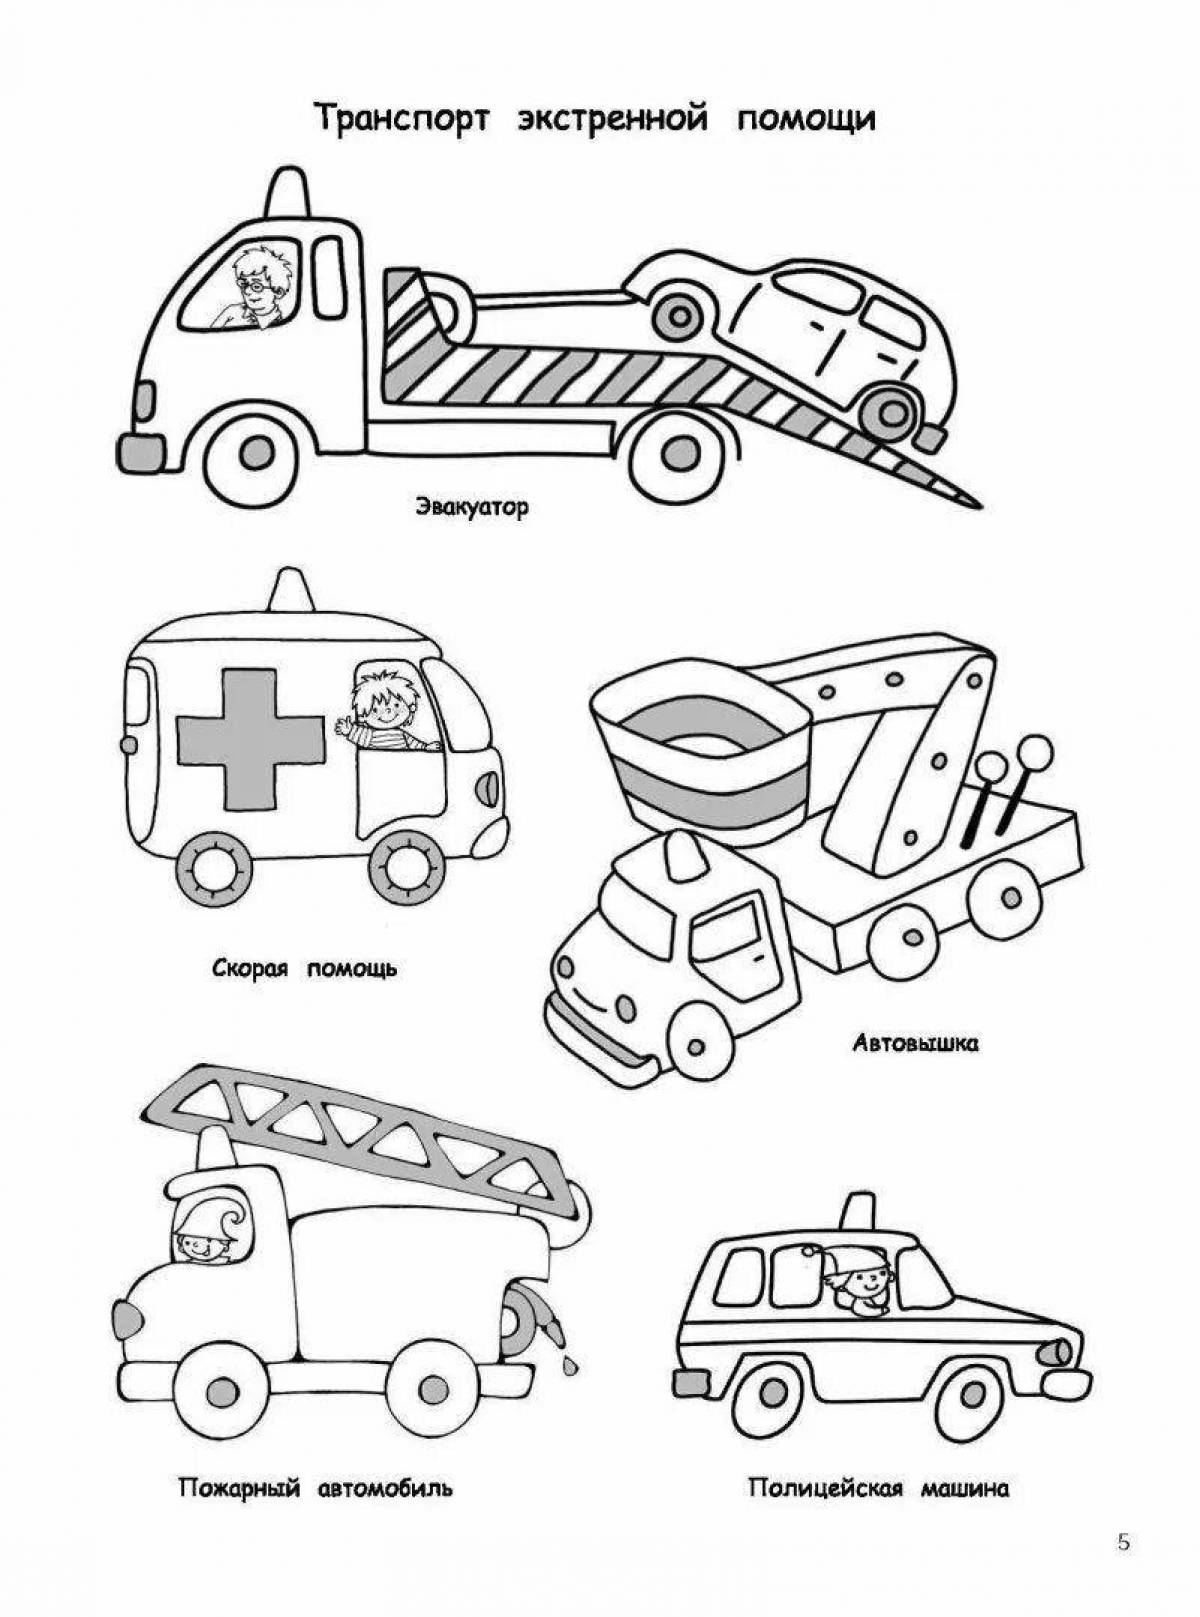 Adorable cars coloring for kids